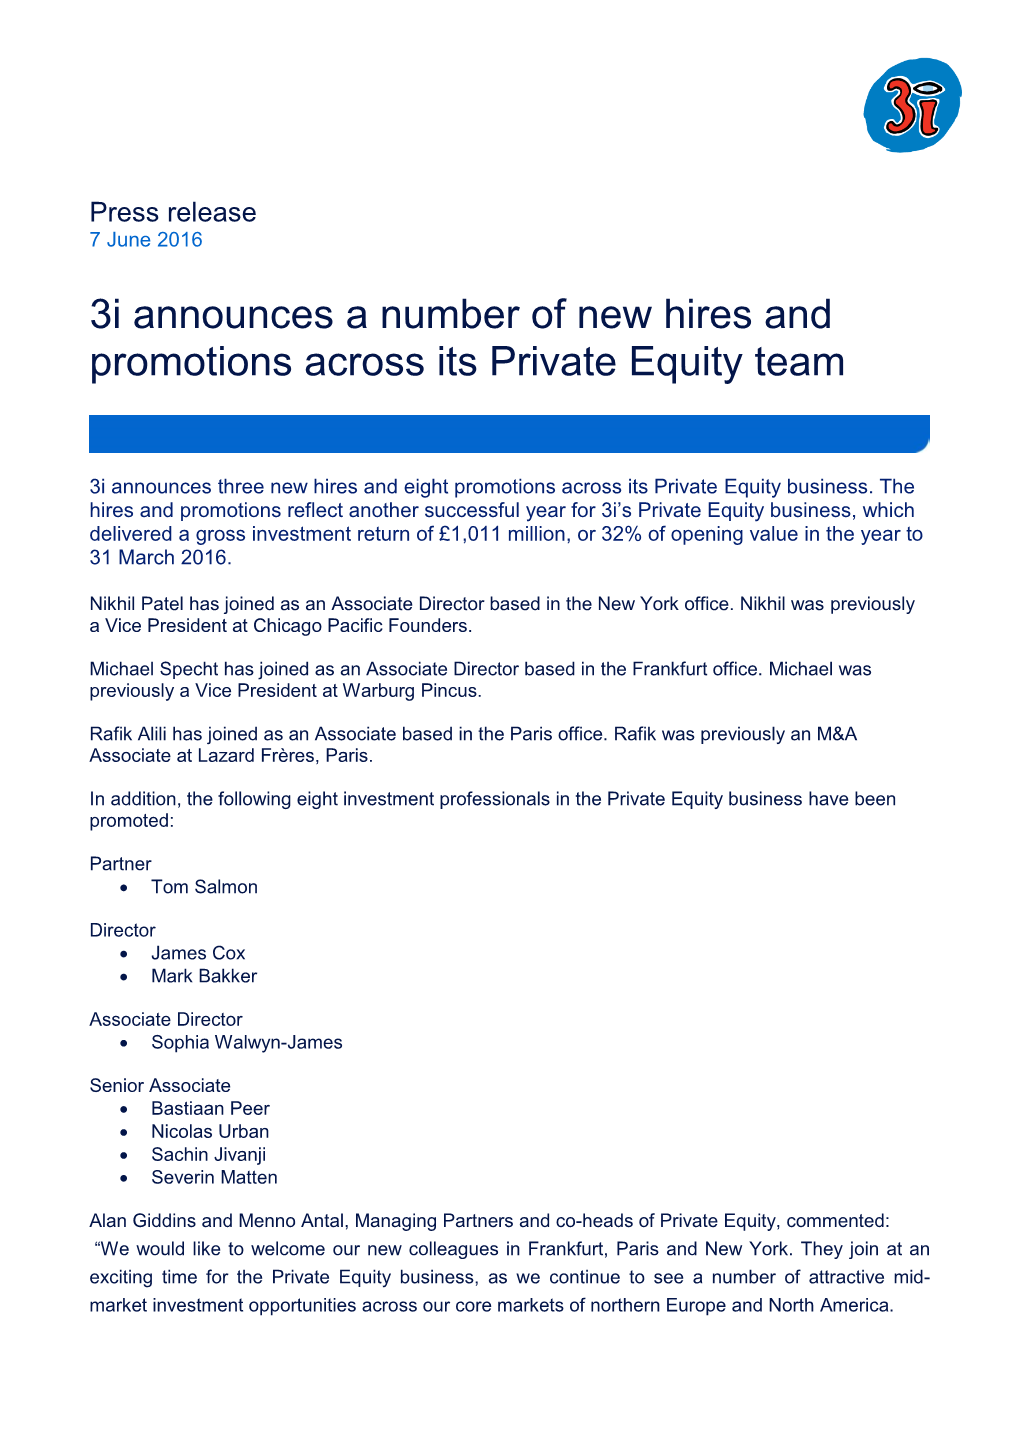 3I Announces a Number of New Hires and Promotions Across Its Private Equity Team